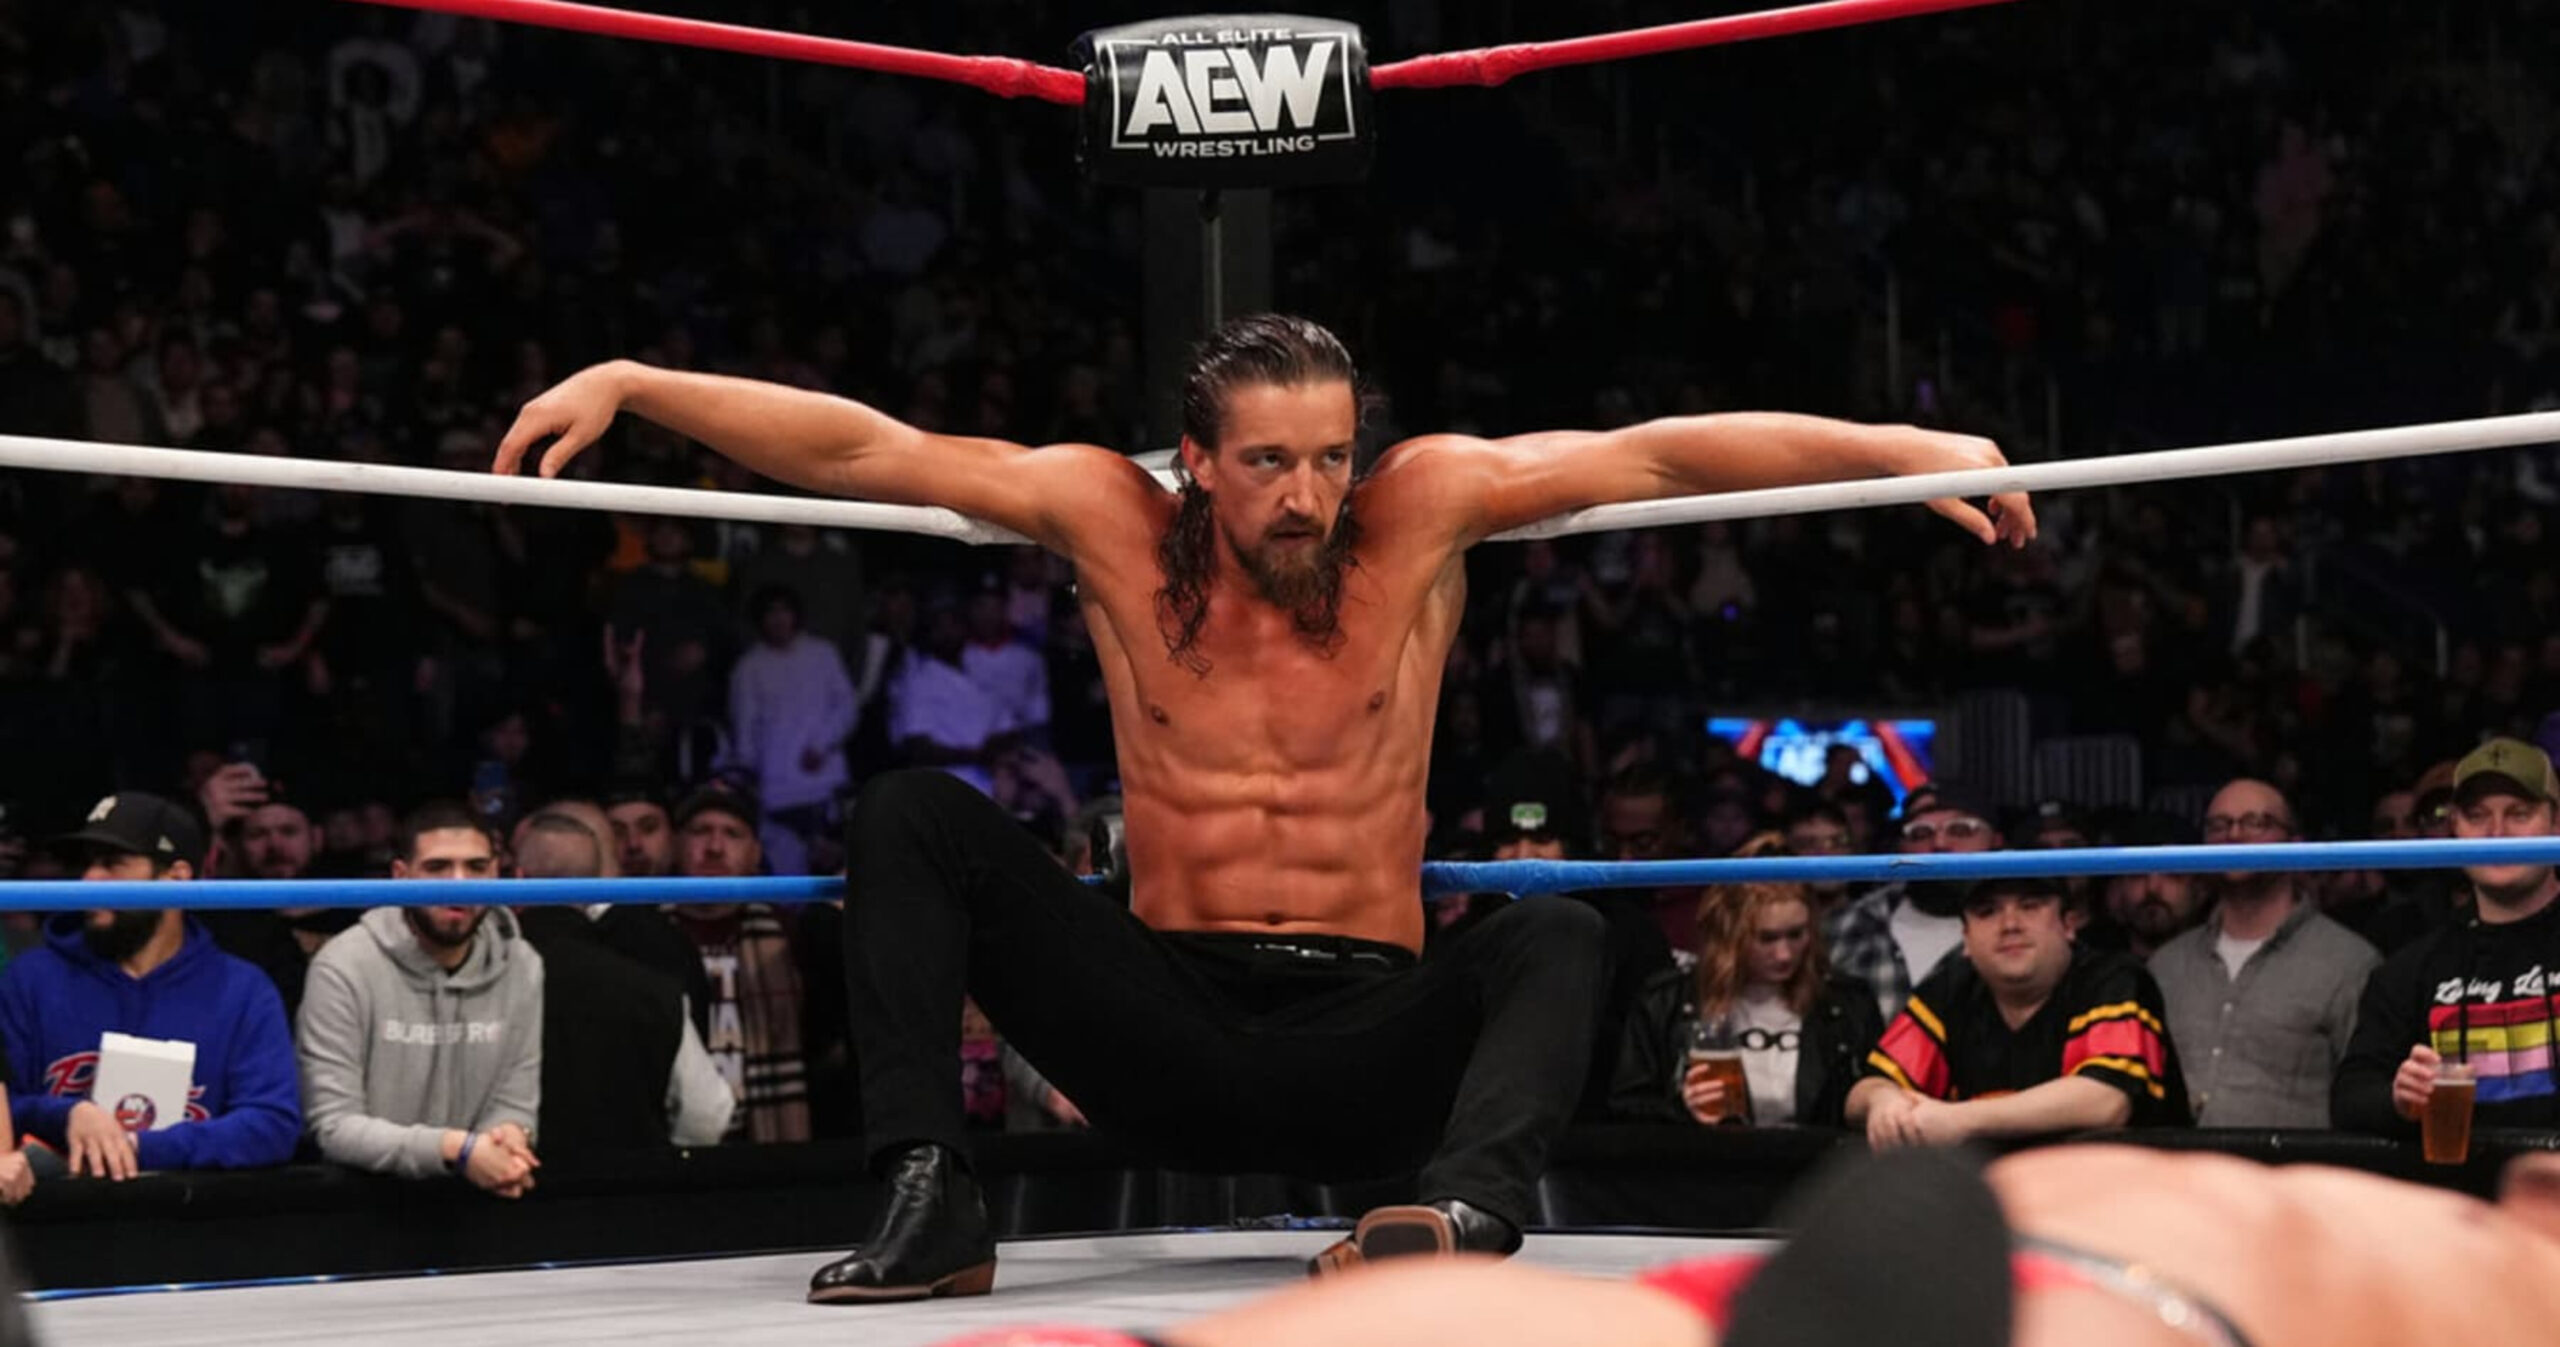 Darby Allin vs. Jay White Officially Set For AEW Big Business